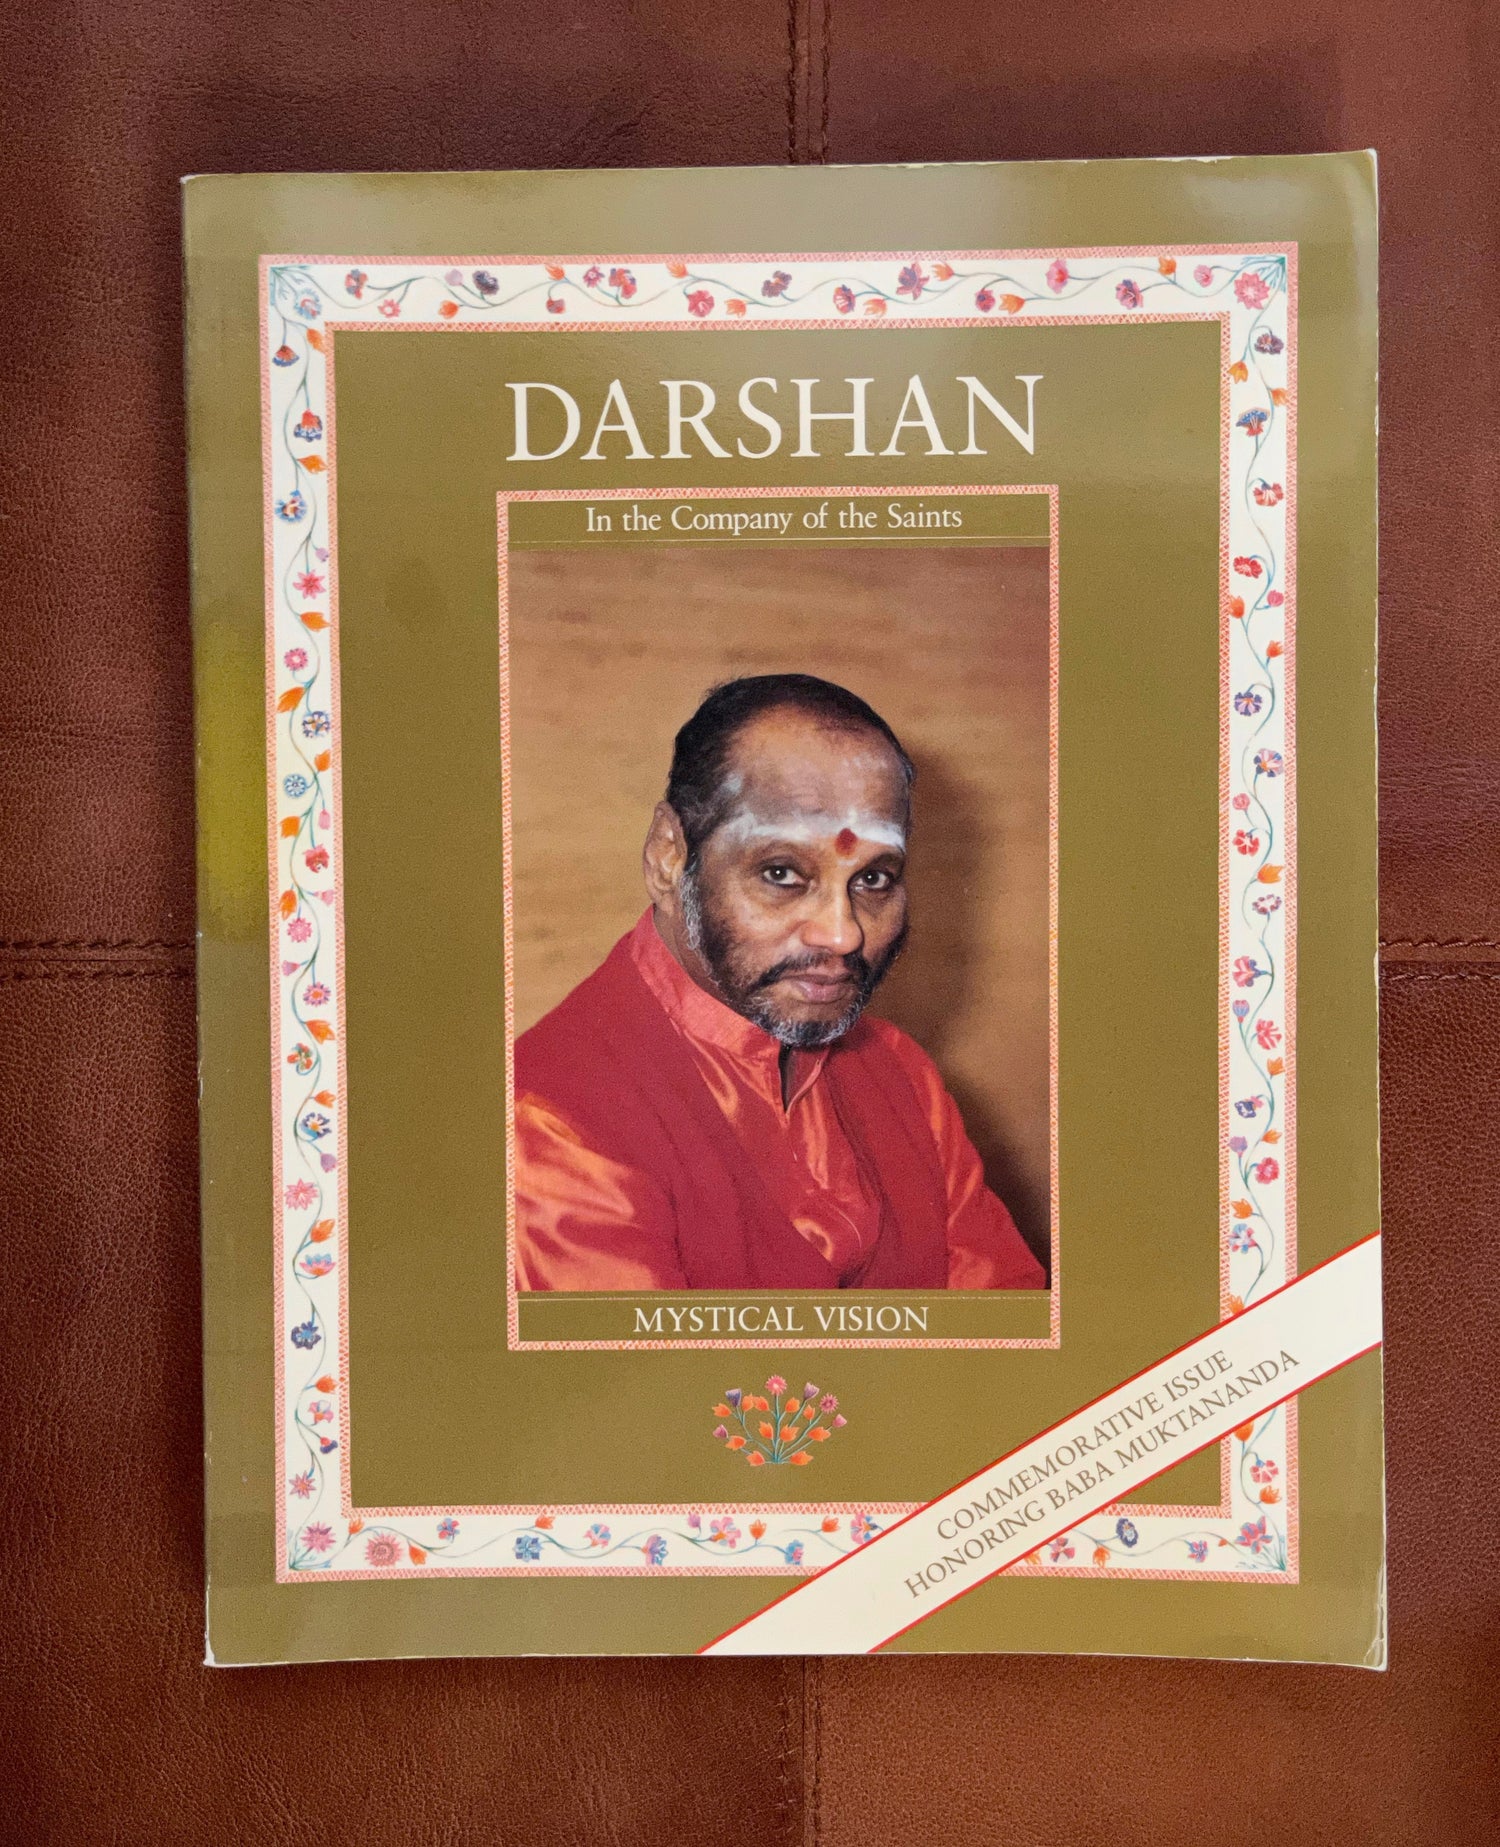 Darshan Magazine, In The Company of The Saints, Mystical Vision